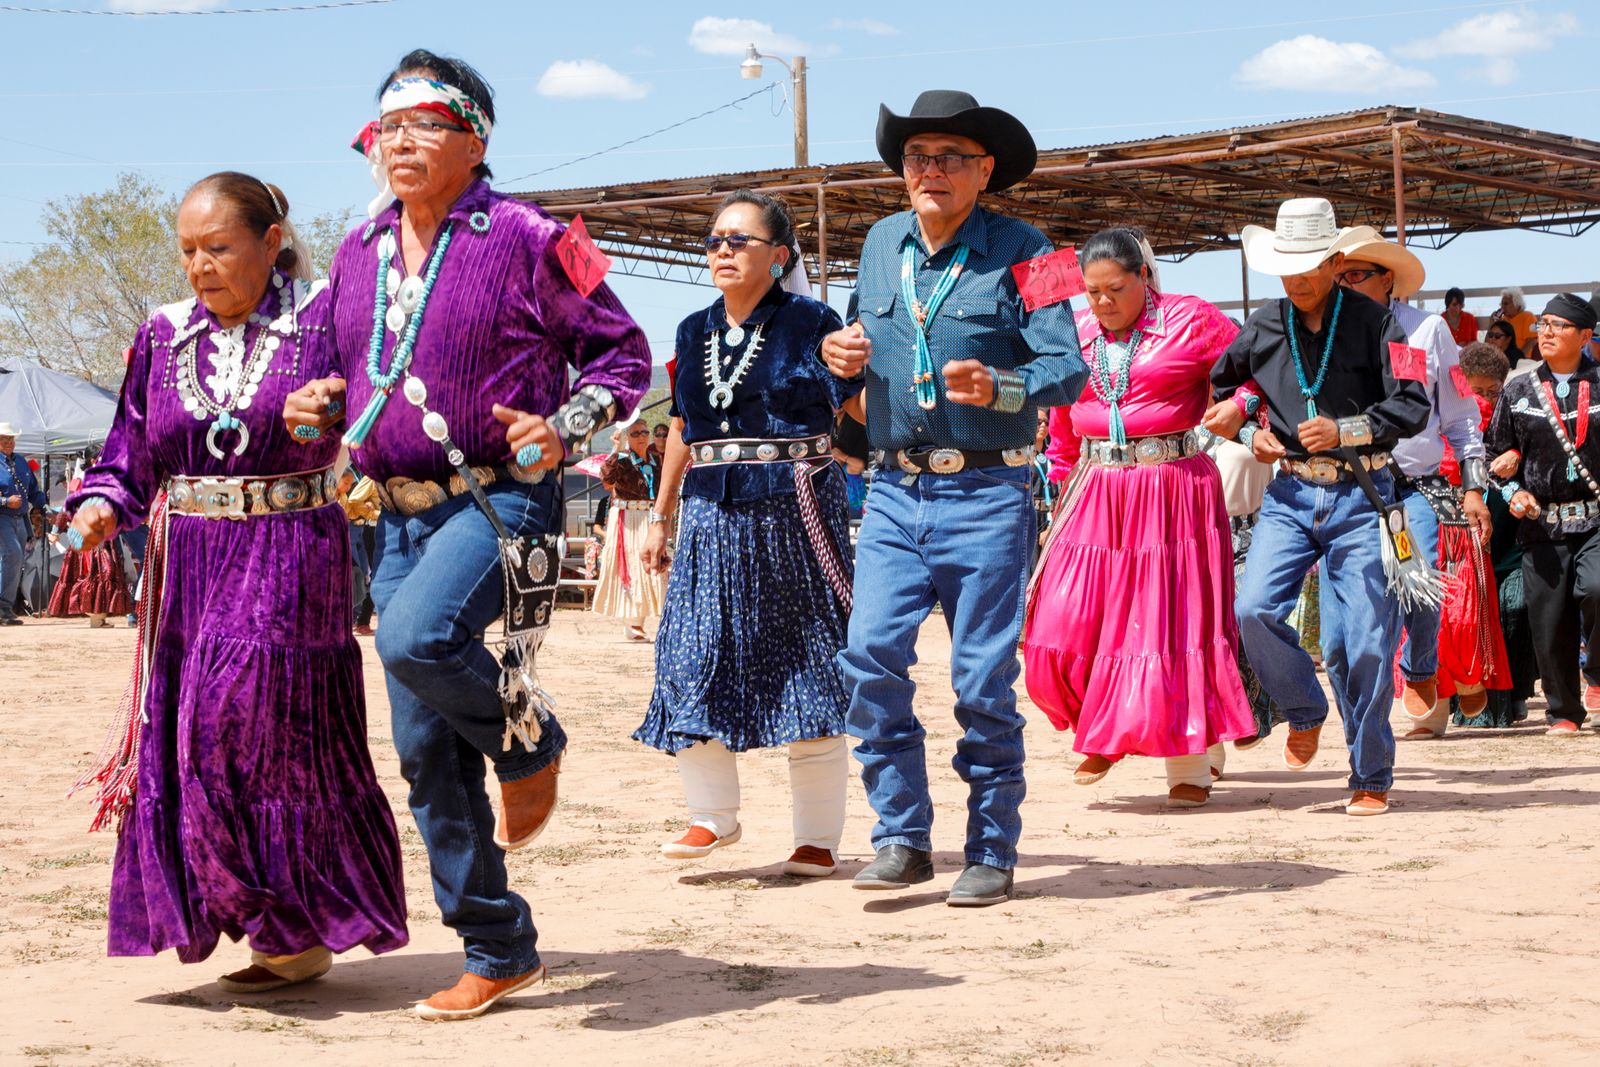 © Julien McRoberts - Image from the A Place of Joy - Navajo Nation Fair photography project